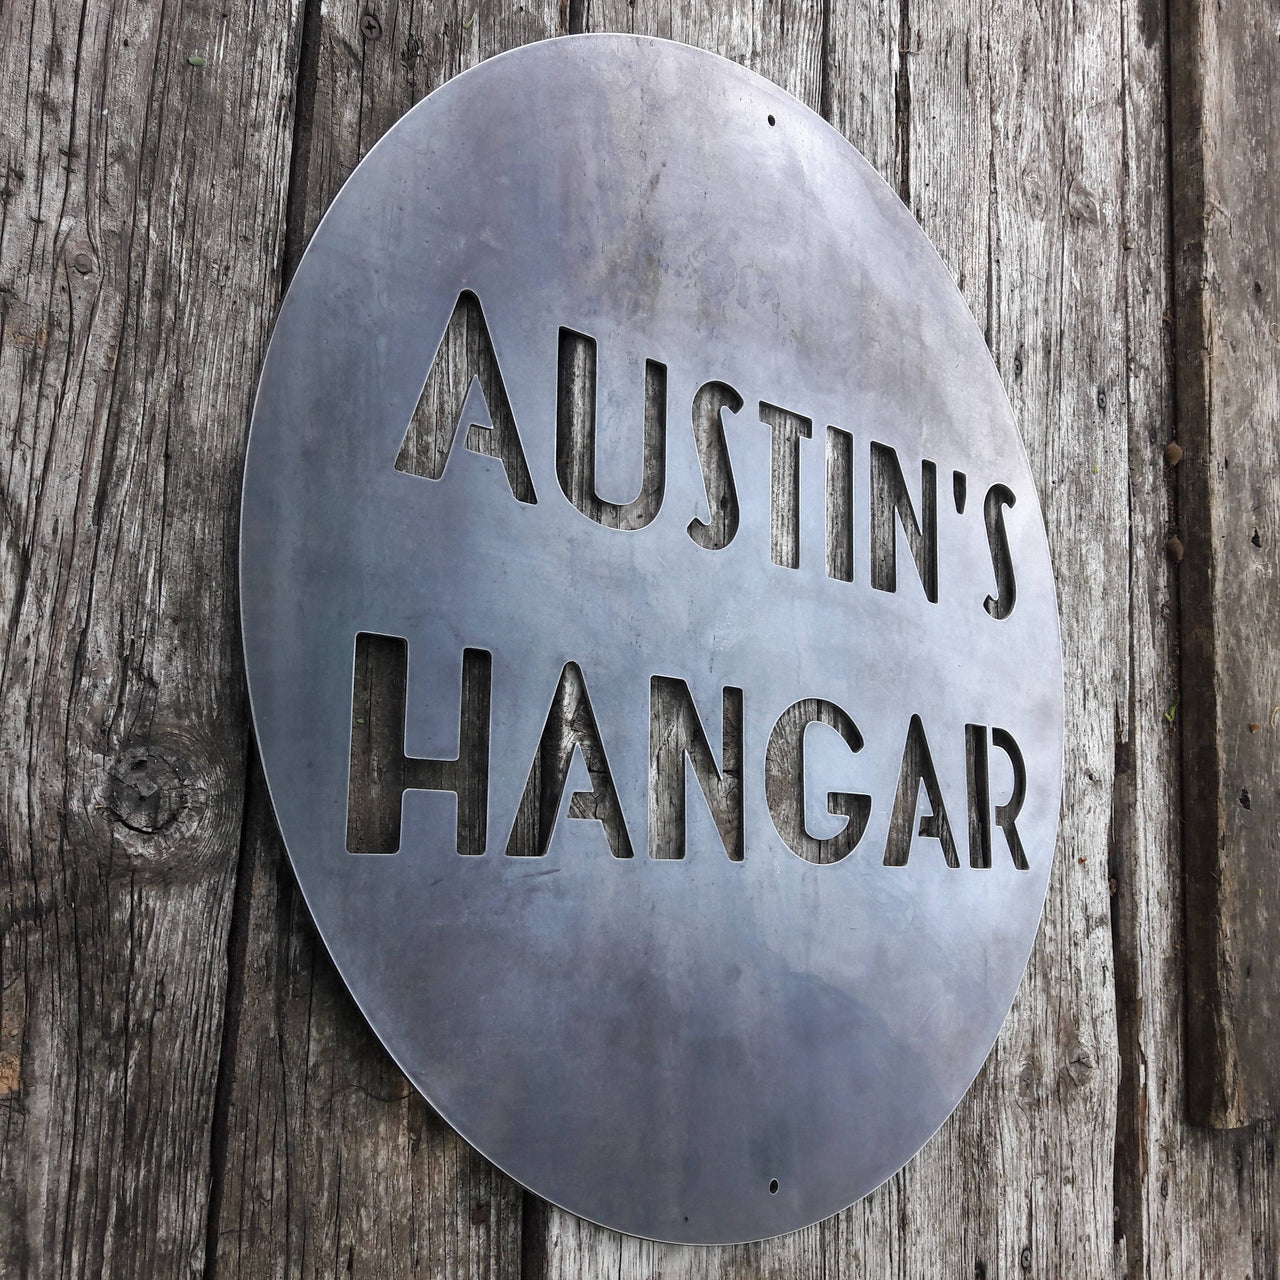 Round Personalized metal sign that reads, "Austin's Hangar"